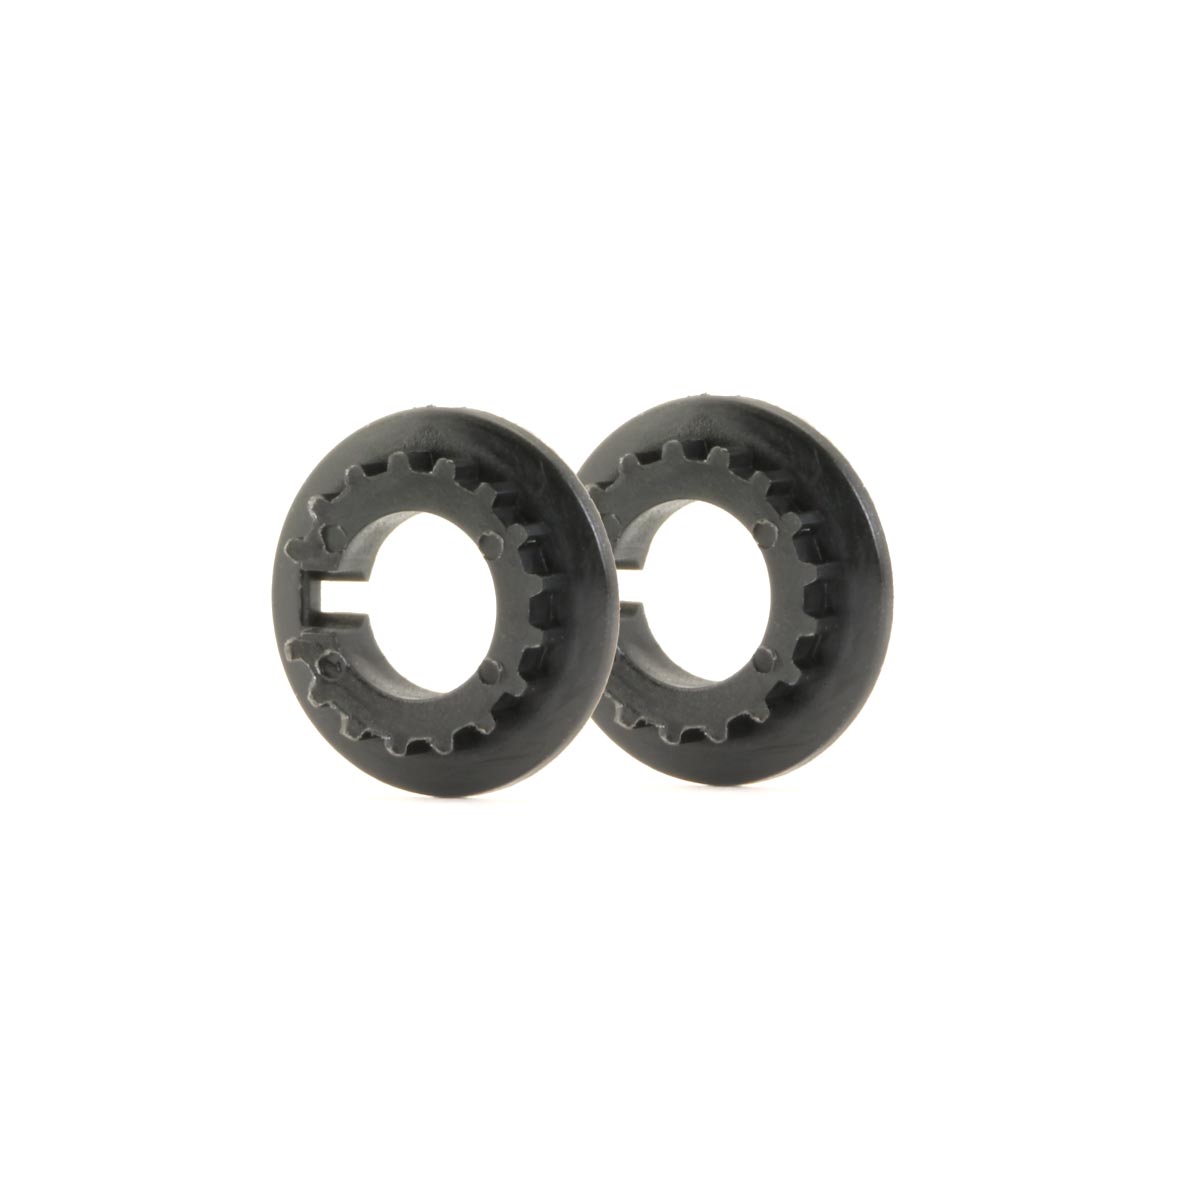 SLOT IT SICH100 4WD 17-TOOTH PULLEY BLACK 2PCS NEW 1/32 SLOT CAR PART 